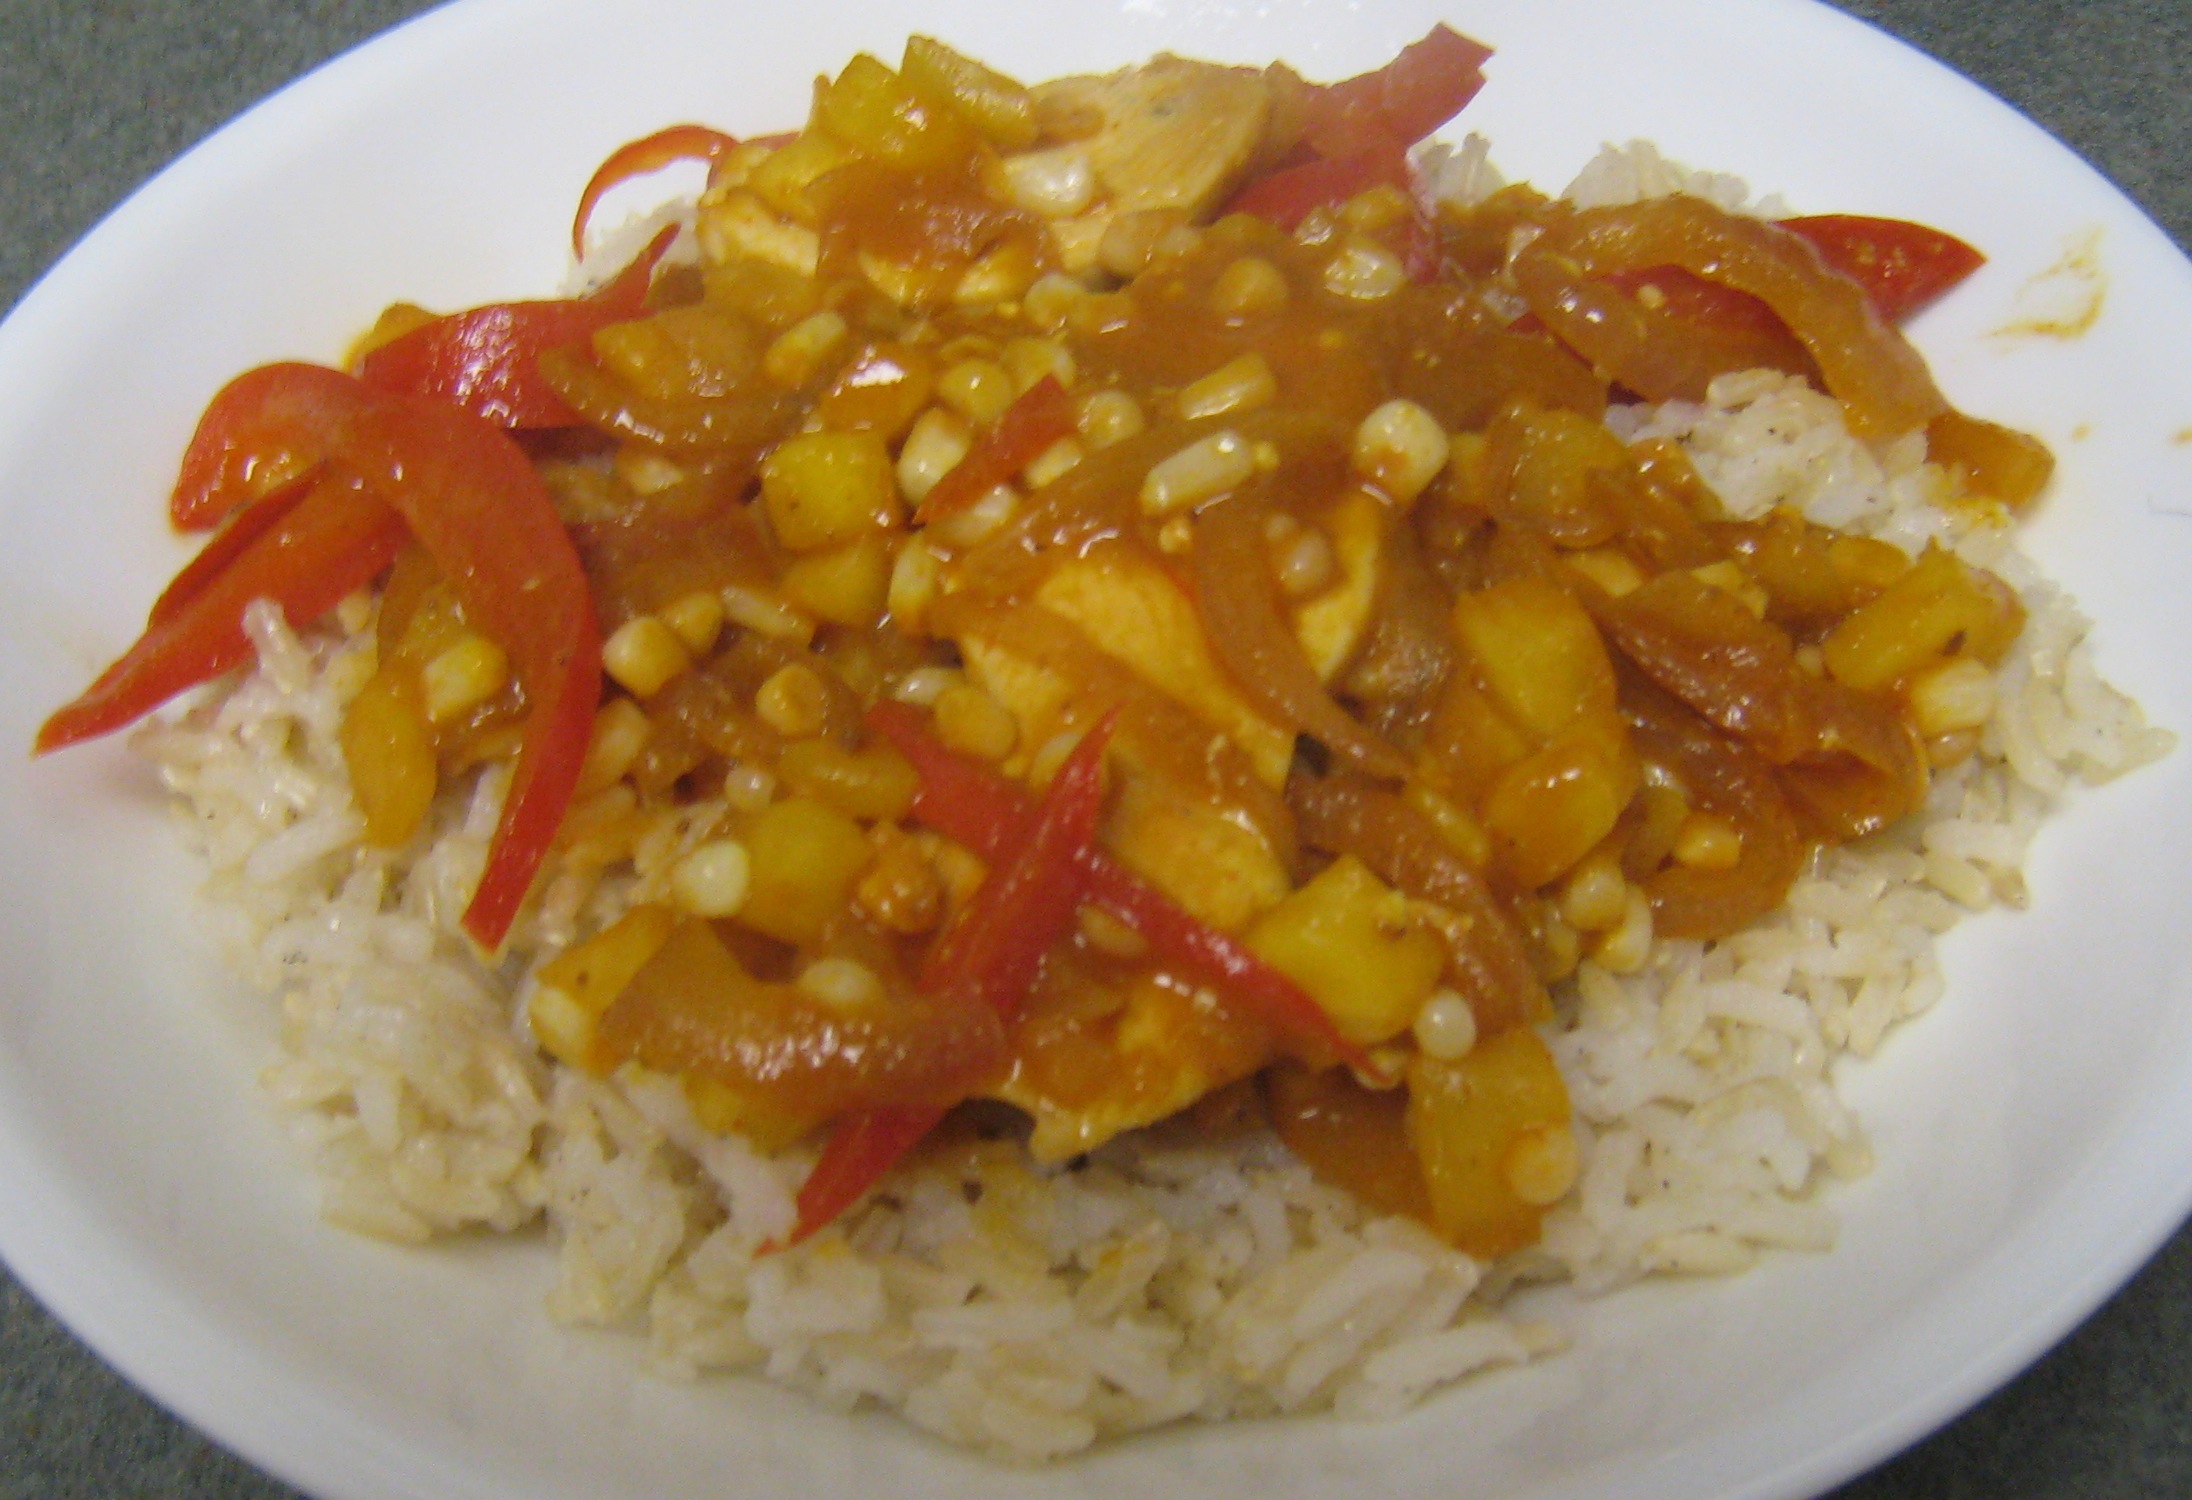 Chicken Stir-Fry with corn, pineapple, and red pepper